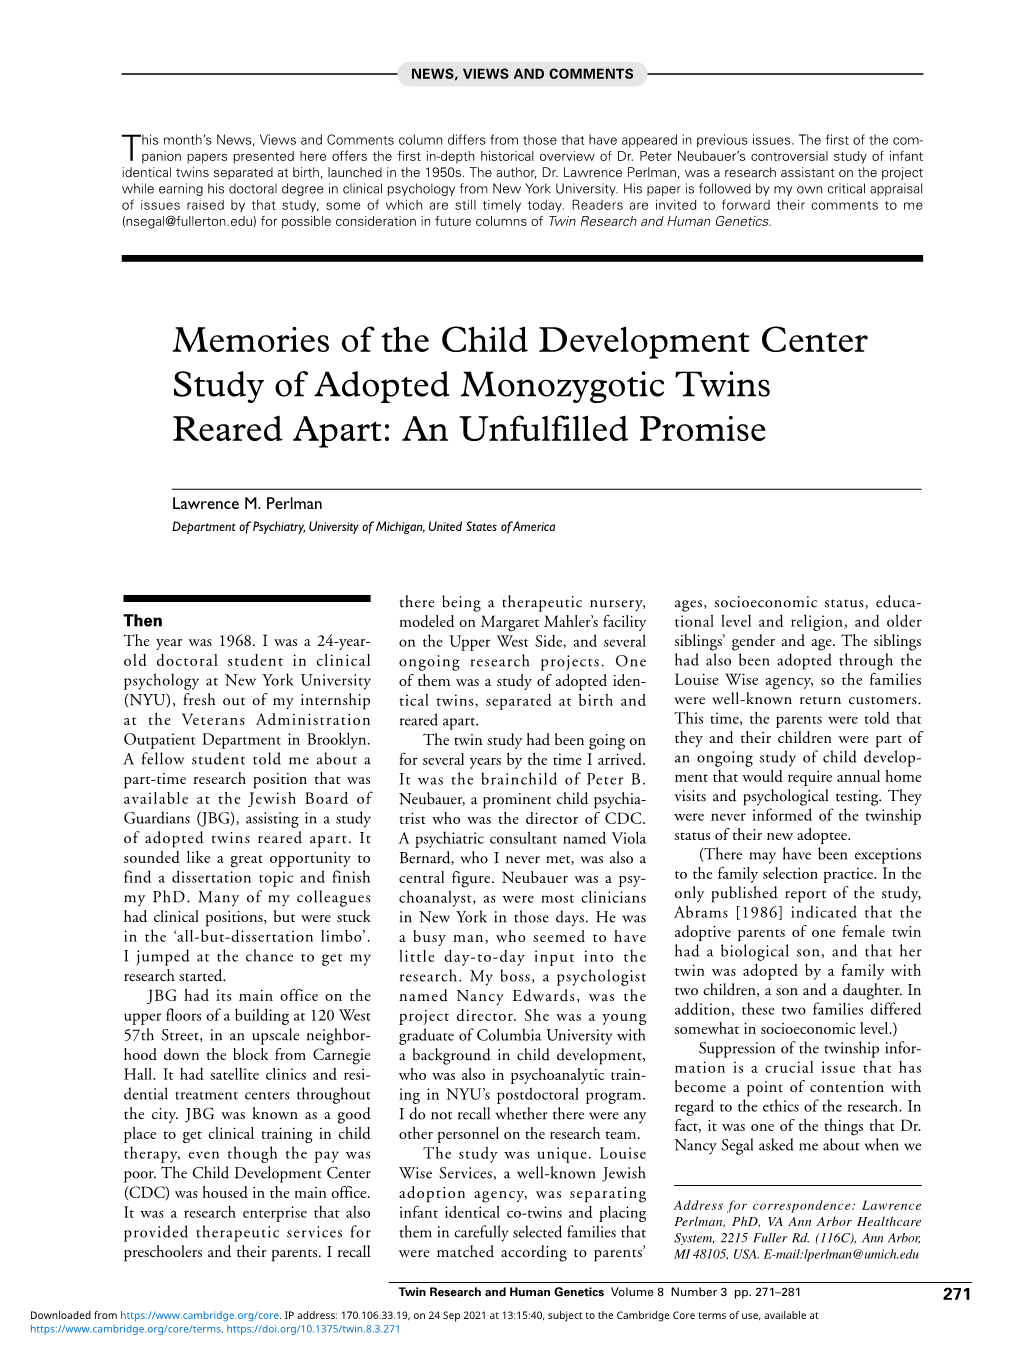 Memories of the Child Development Center Study of Adopted Monozygotic Twins Reared Apart: an Unfulfilled Promise